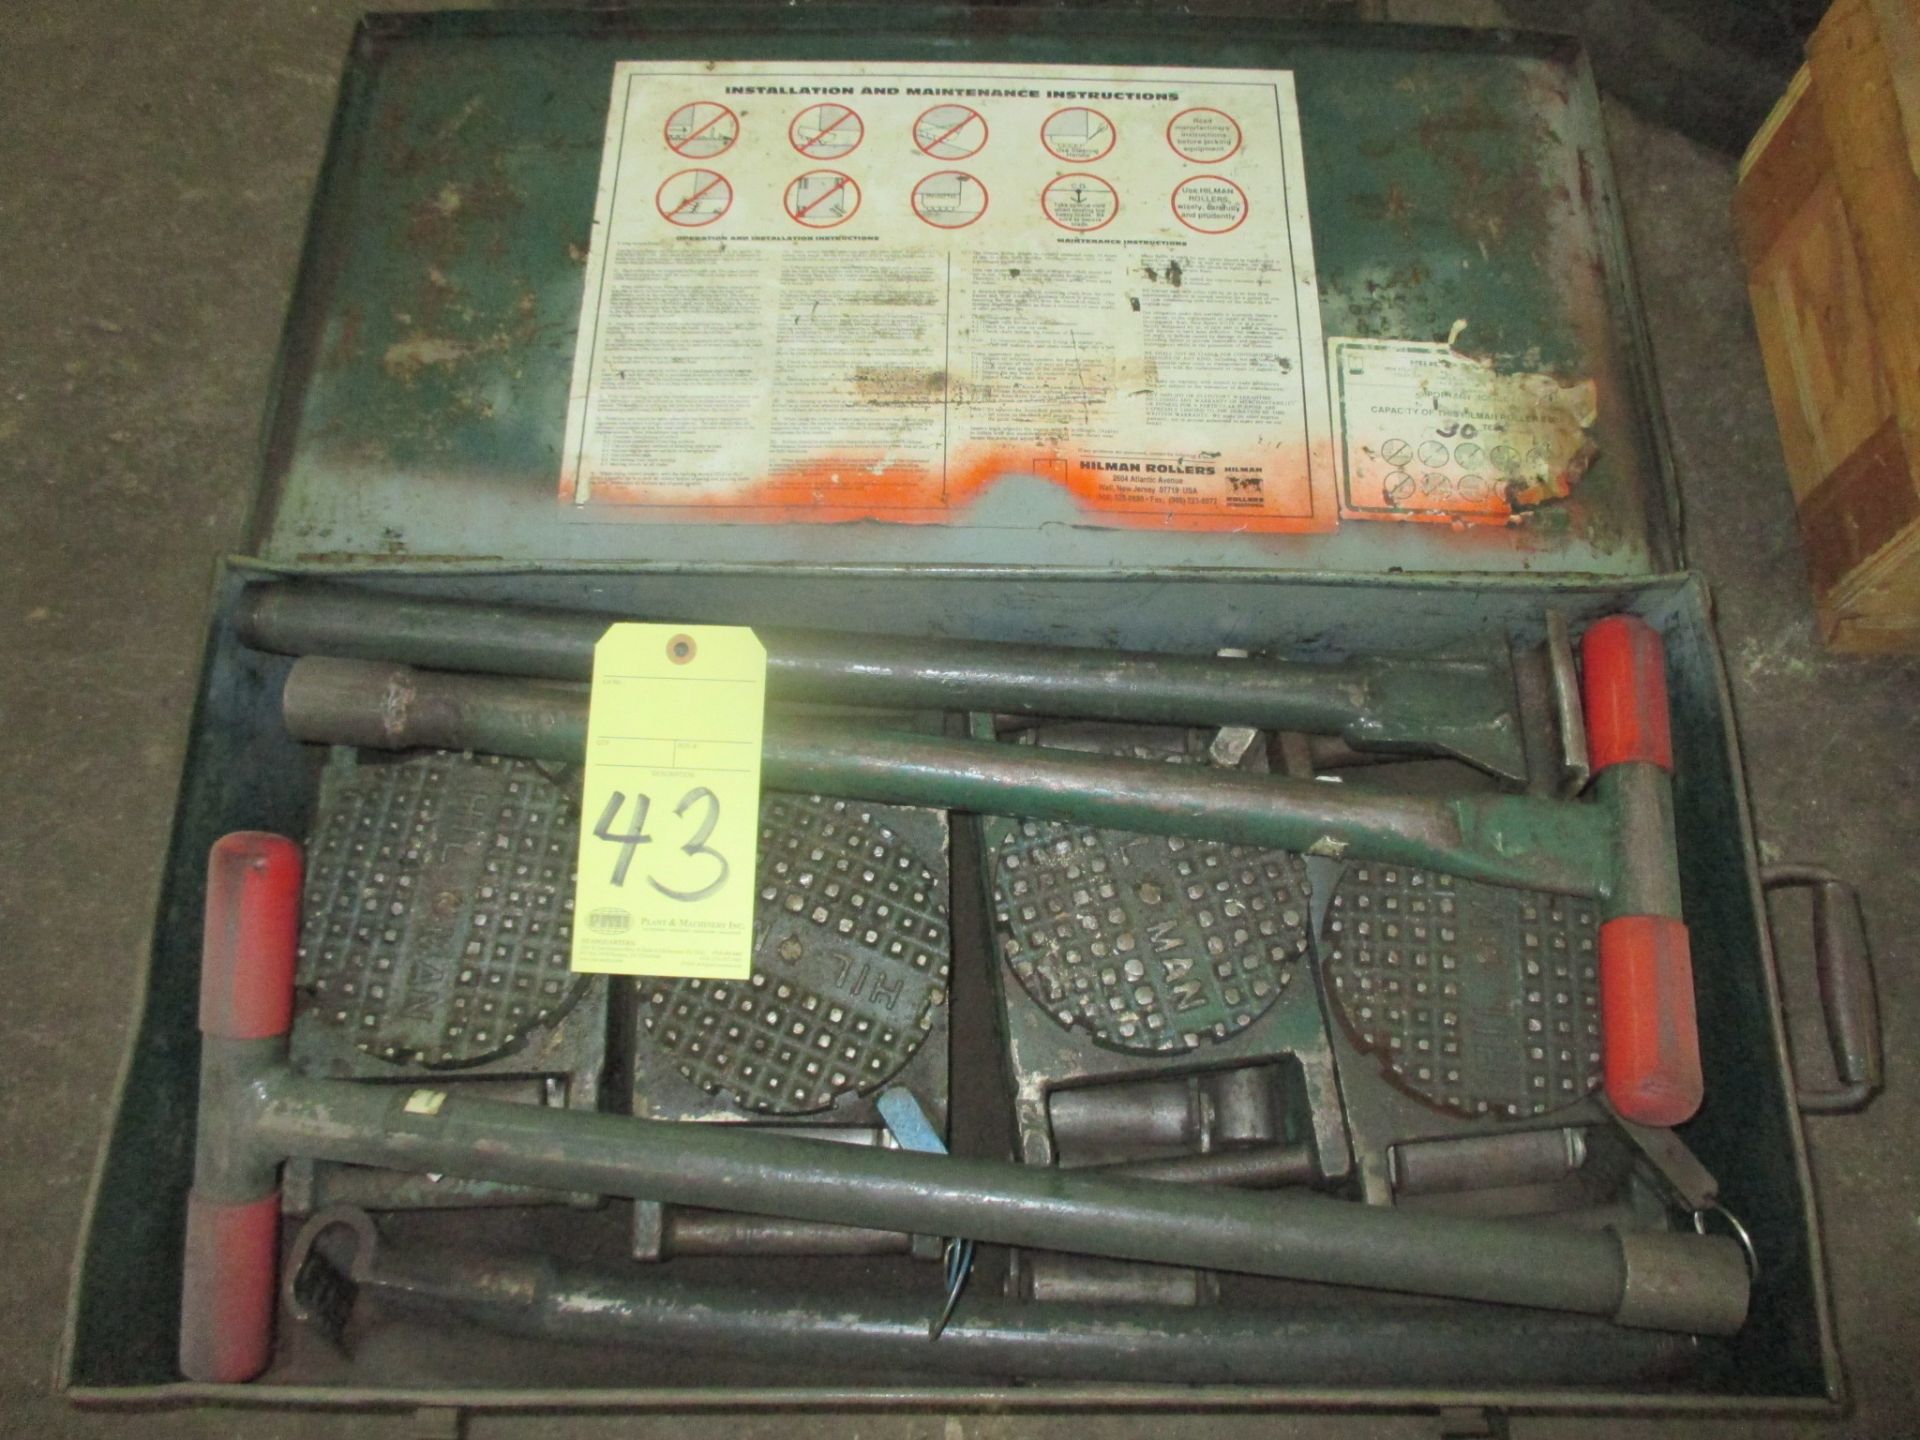 LOT OF MACHINE MOVING ROLLERS, HILMAN 30 T. CAP. (one set)